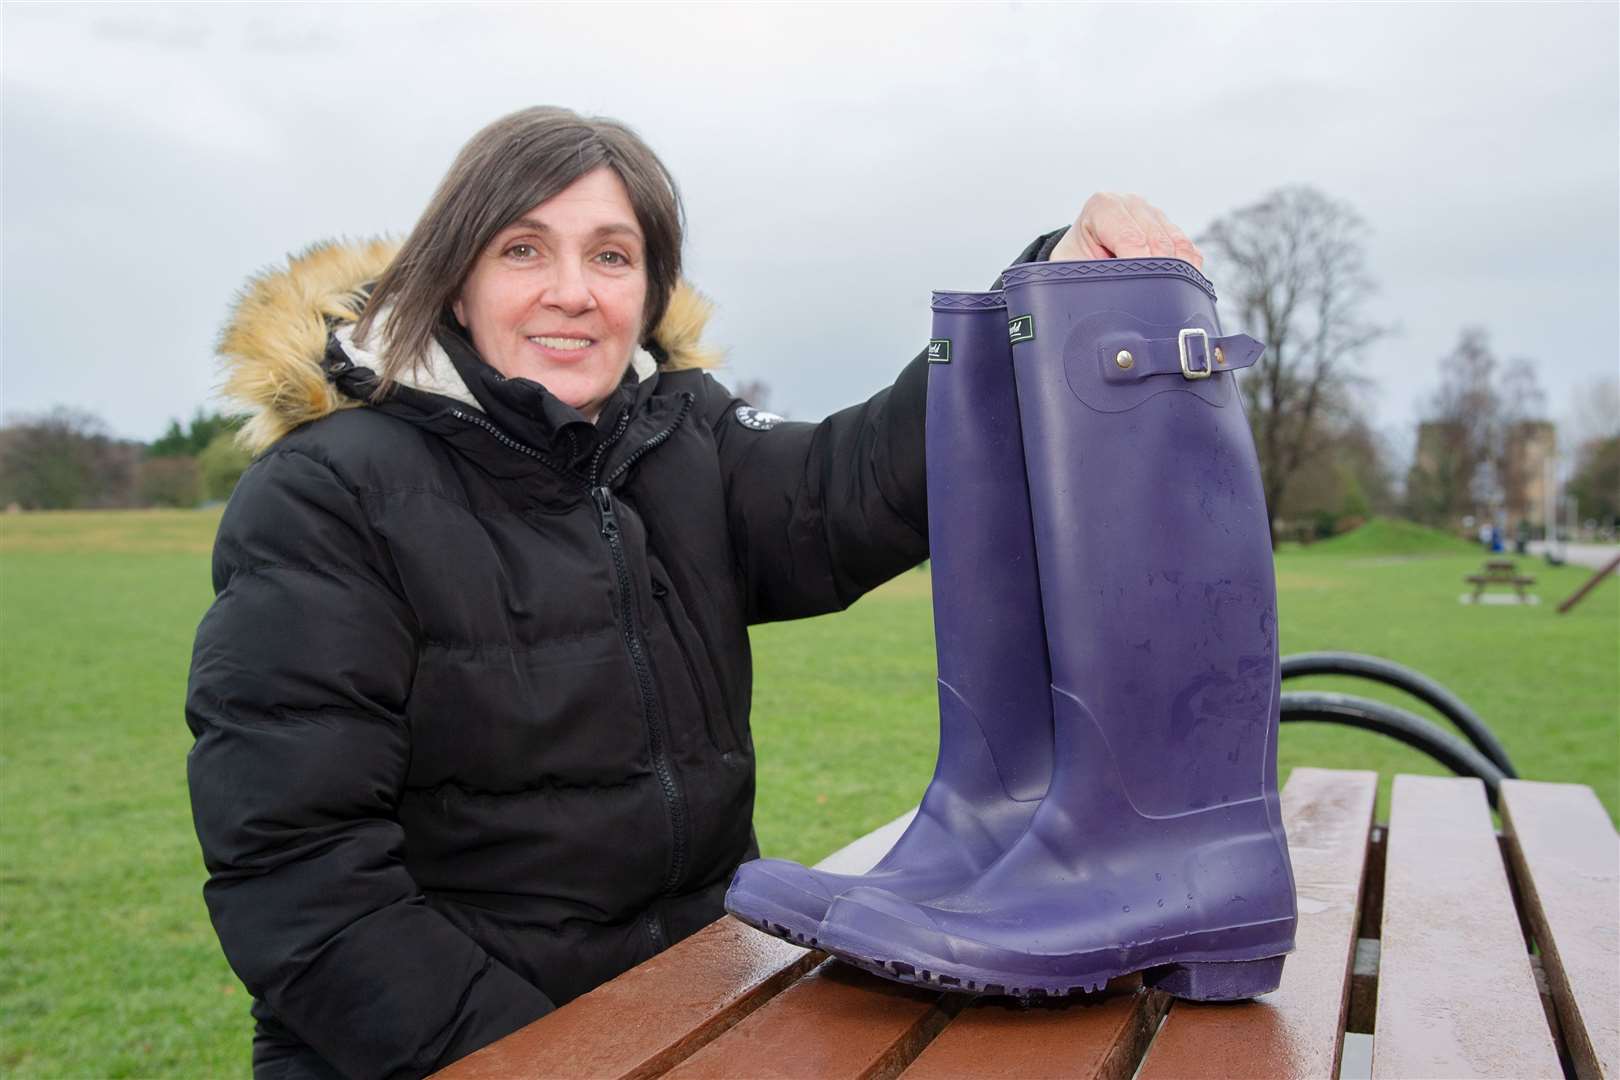 Fran Mitchell is organising a five kilometre "welly waddle" to raise money for the Scottish Cot Death Trust. Picture: Daniel Forsyth